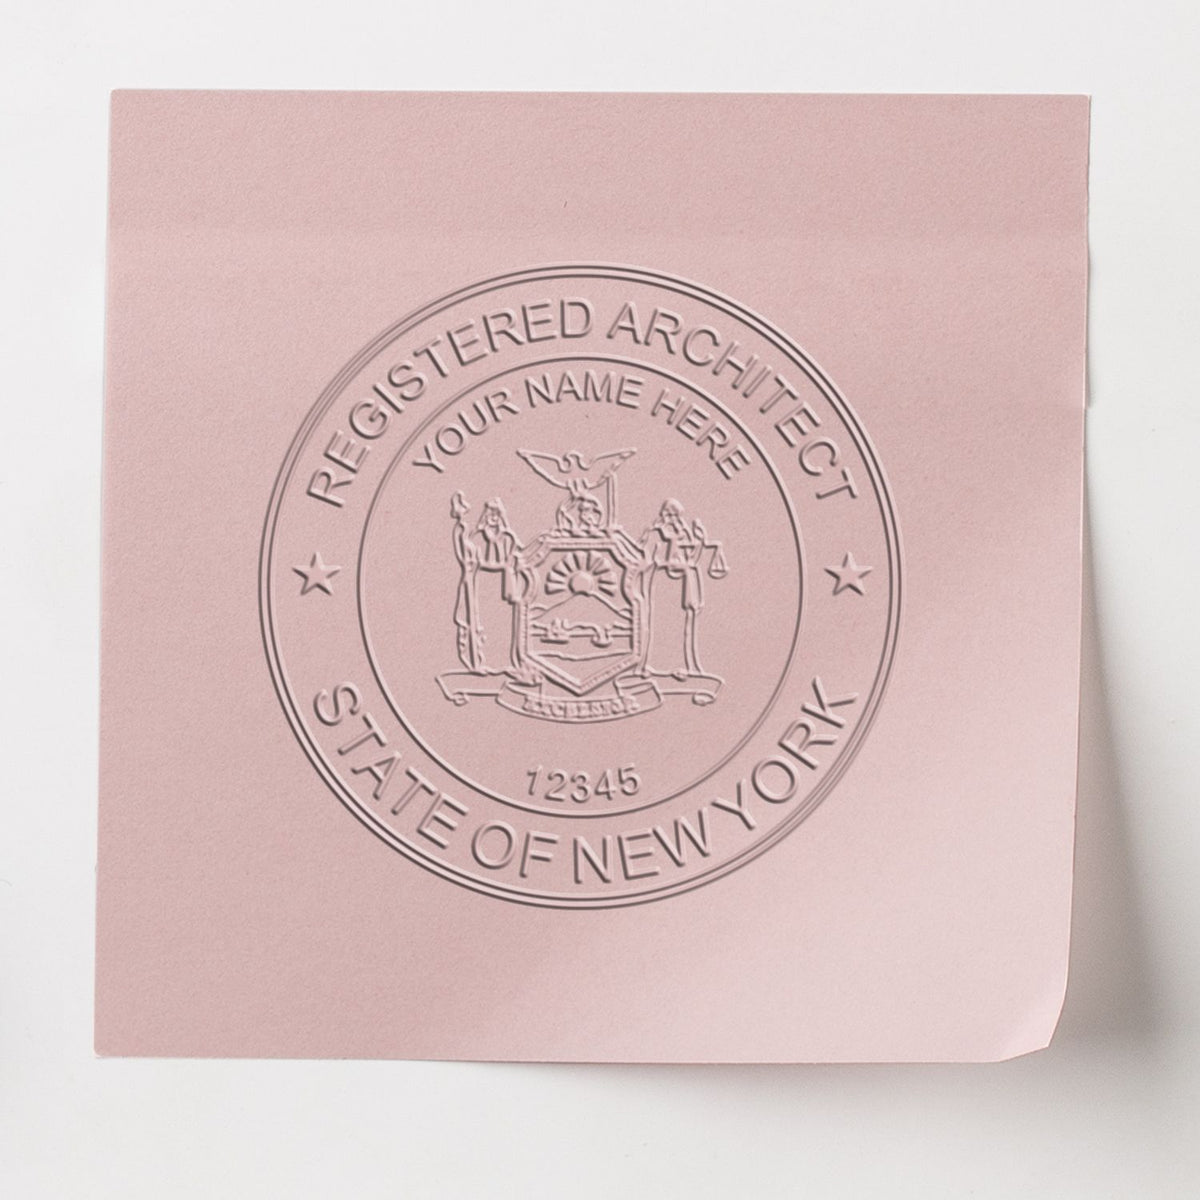 This paper is stamped with a sample imprint of the Handheld New York Architect Seal Embosser, signifying its quality and reliability.